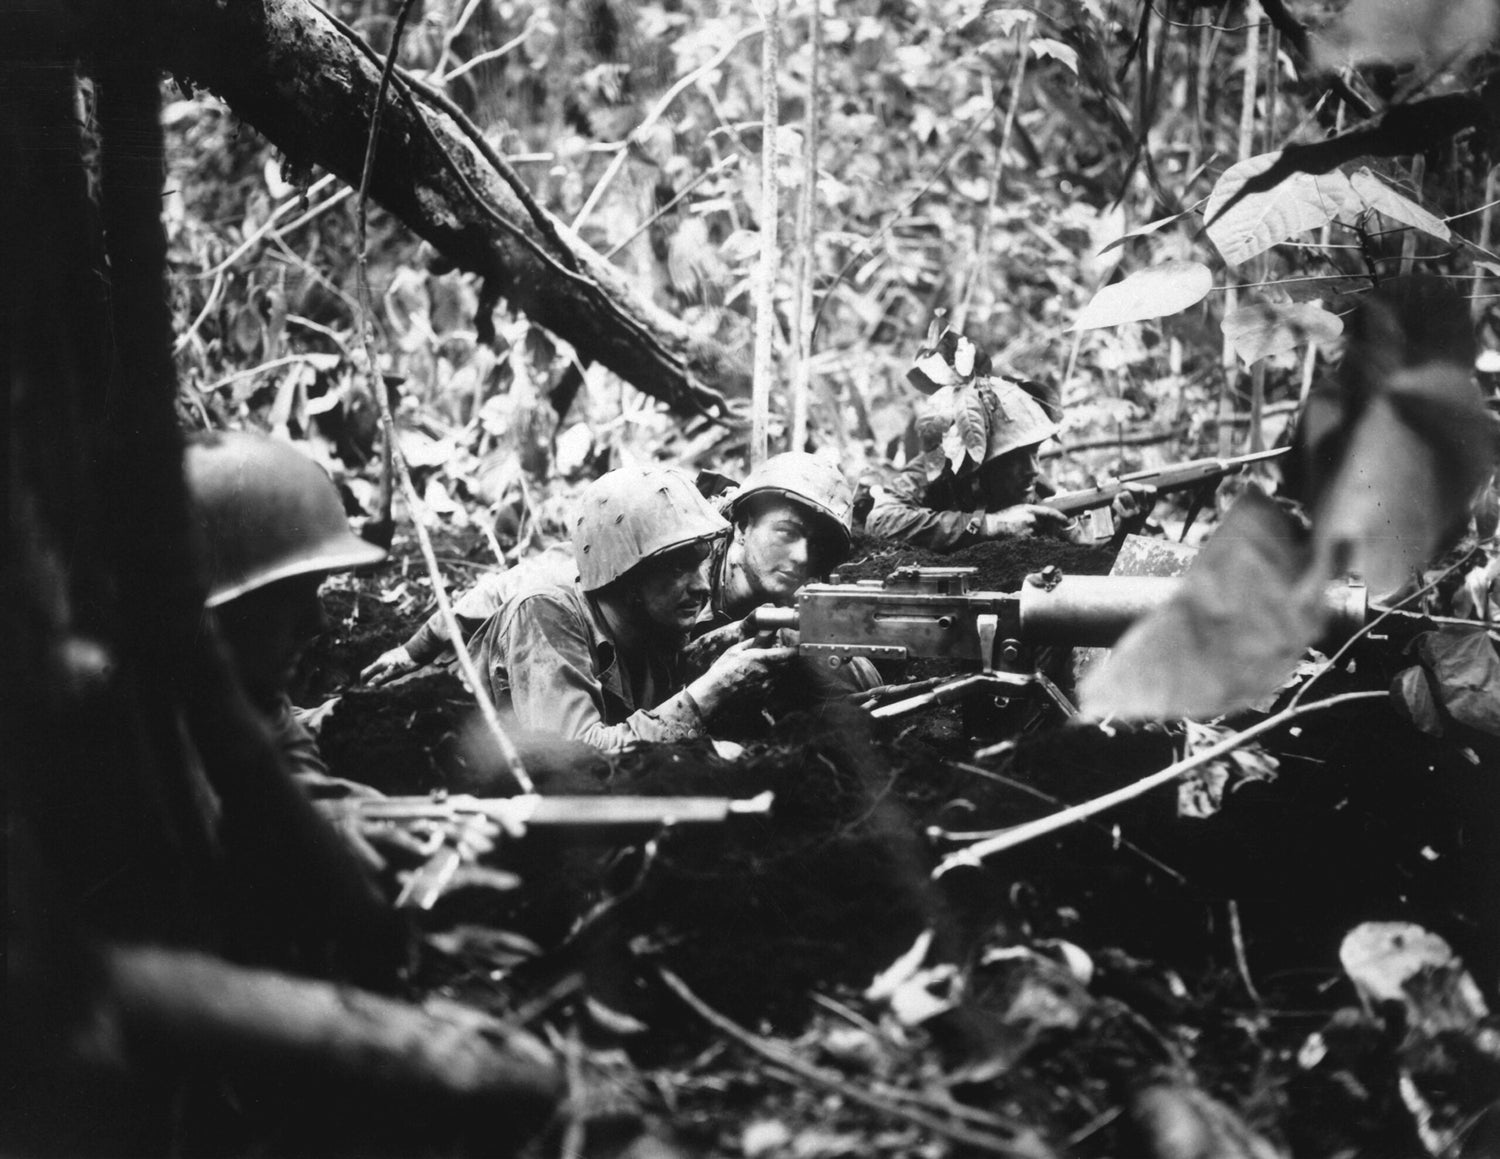 Retreating at first into the jungle of Cape Gloucester, Japanese soldiers finally gathered strength and counterattacked their Marine pursuers. These machine gunners pushed them back.